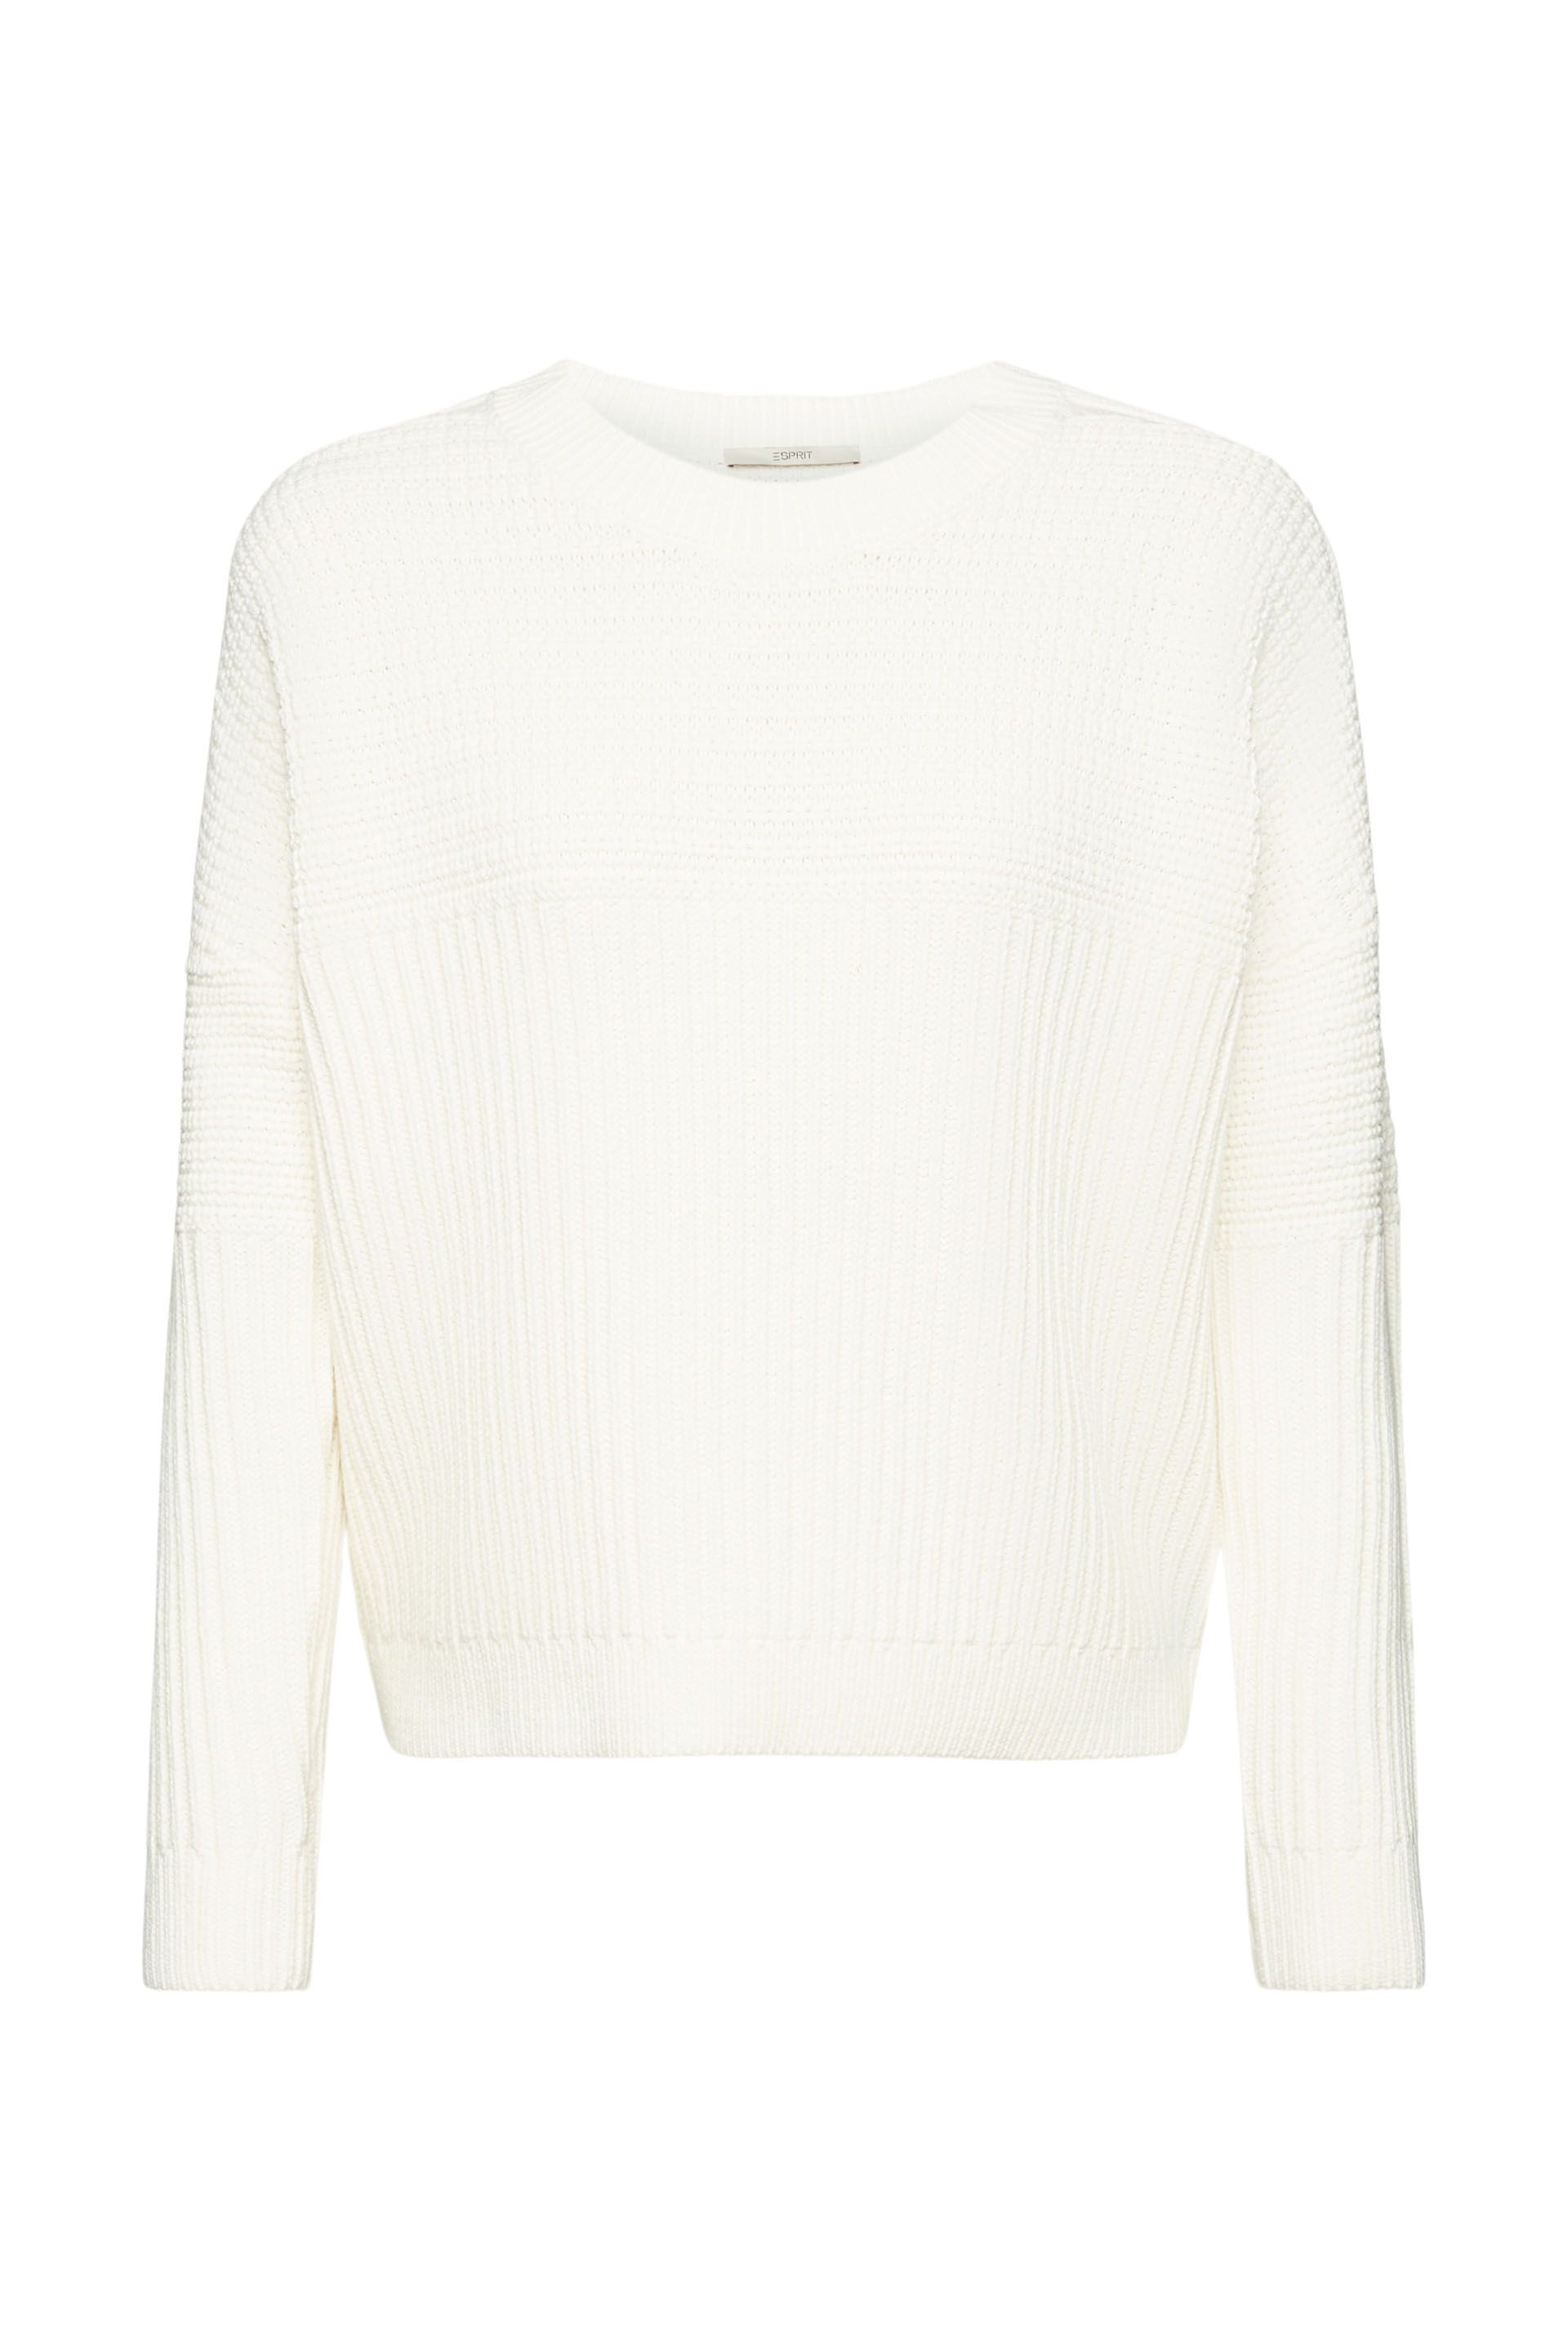 Esprit - Pullover in maglia chunky in misto cotone, Bianco, large image number 0